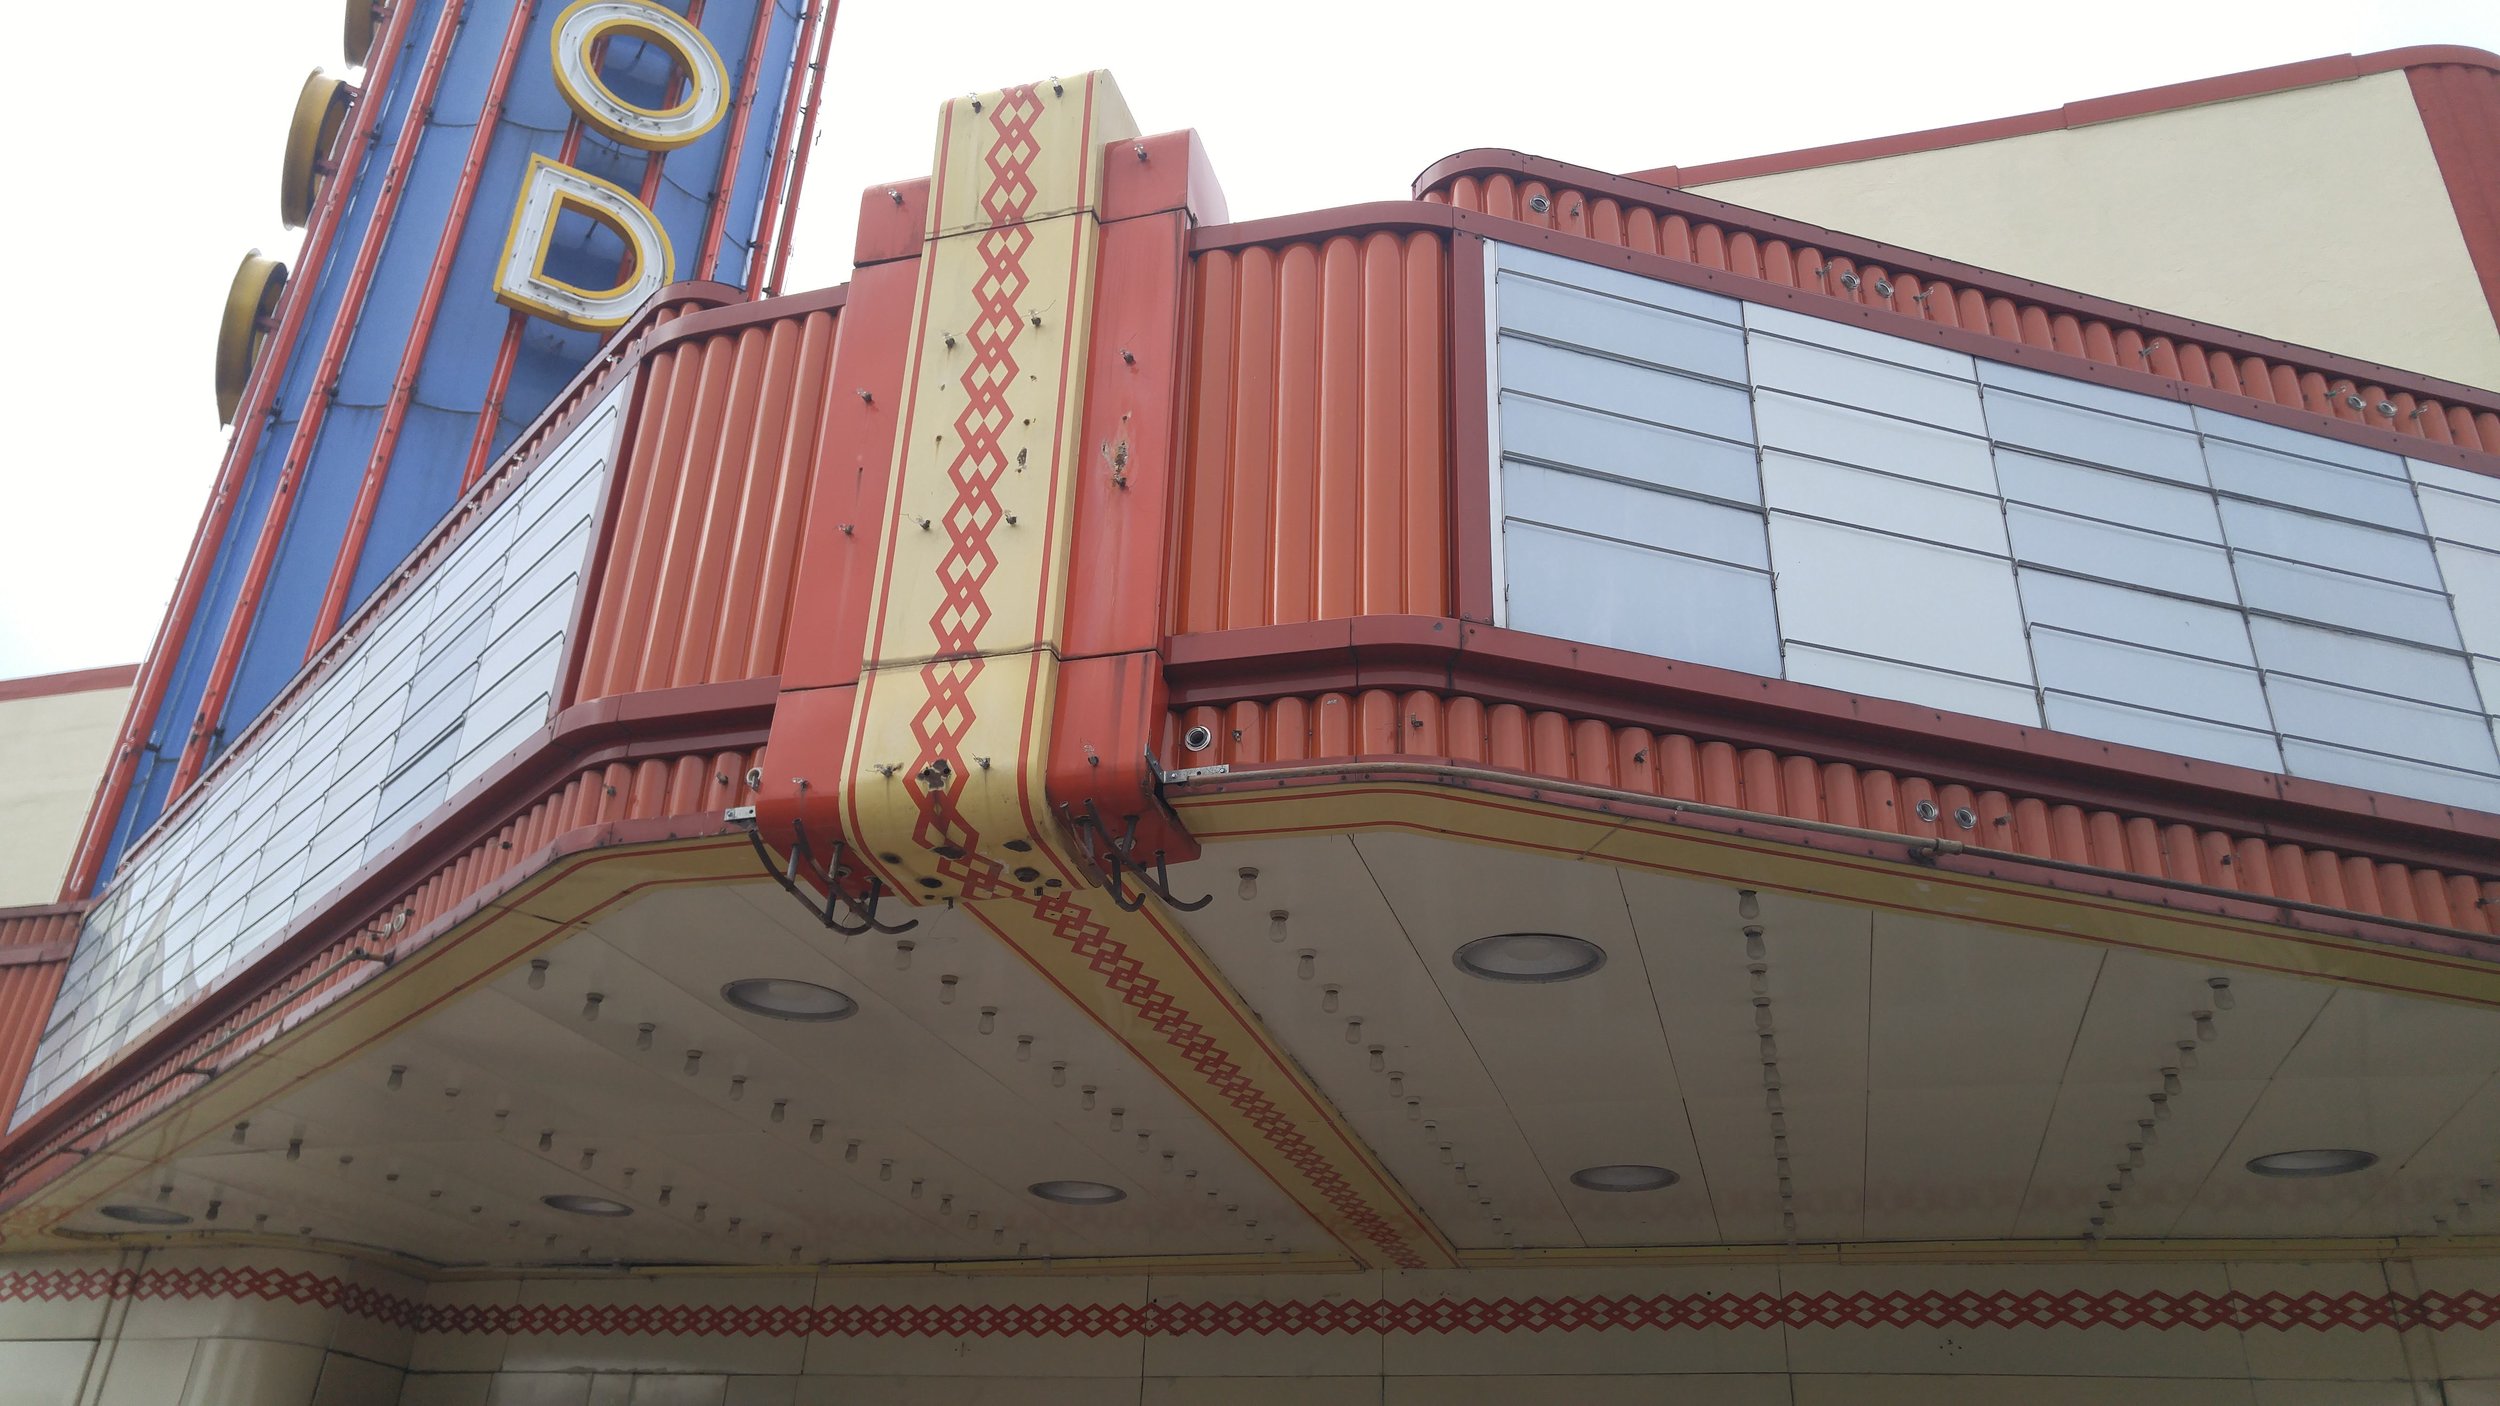  The marquee looks odd, temporarily shorn of its neon tubing. 